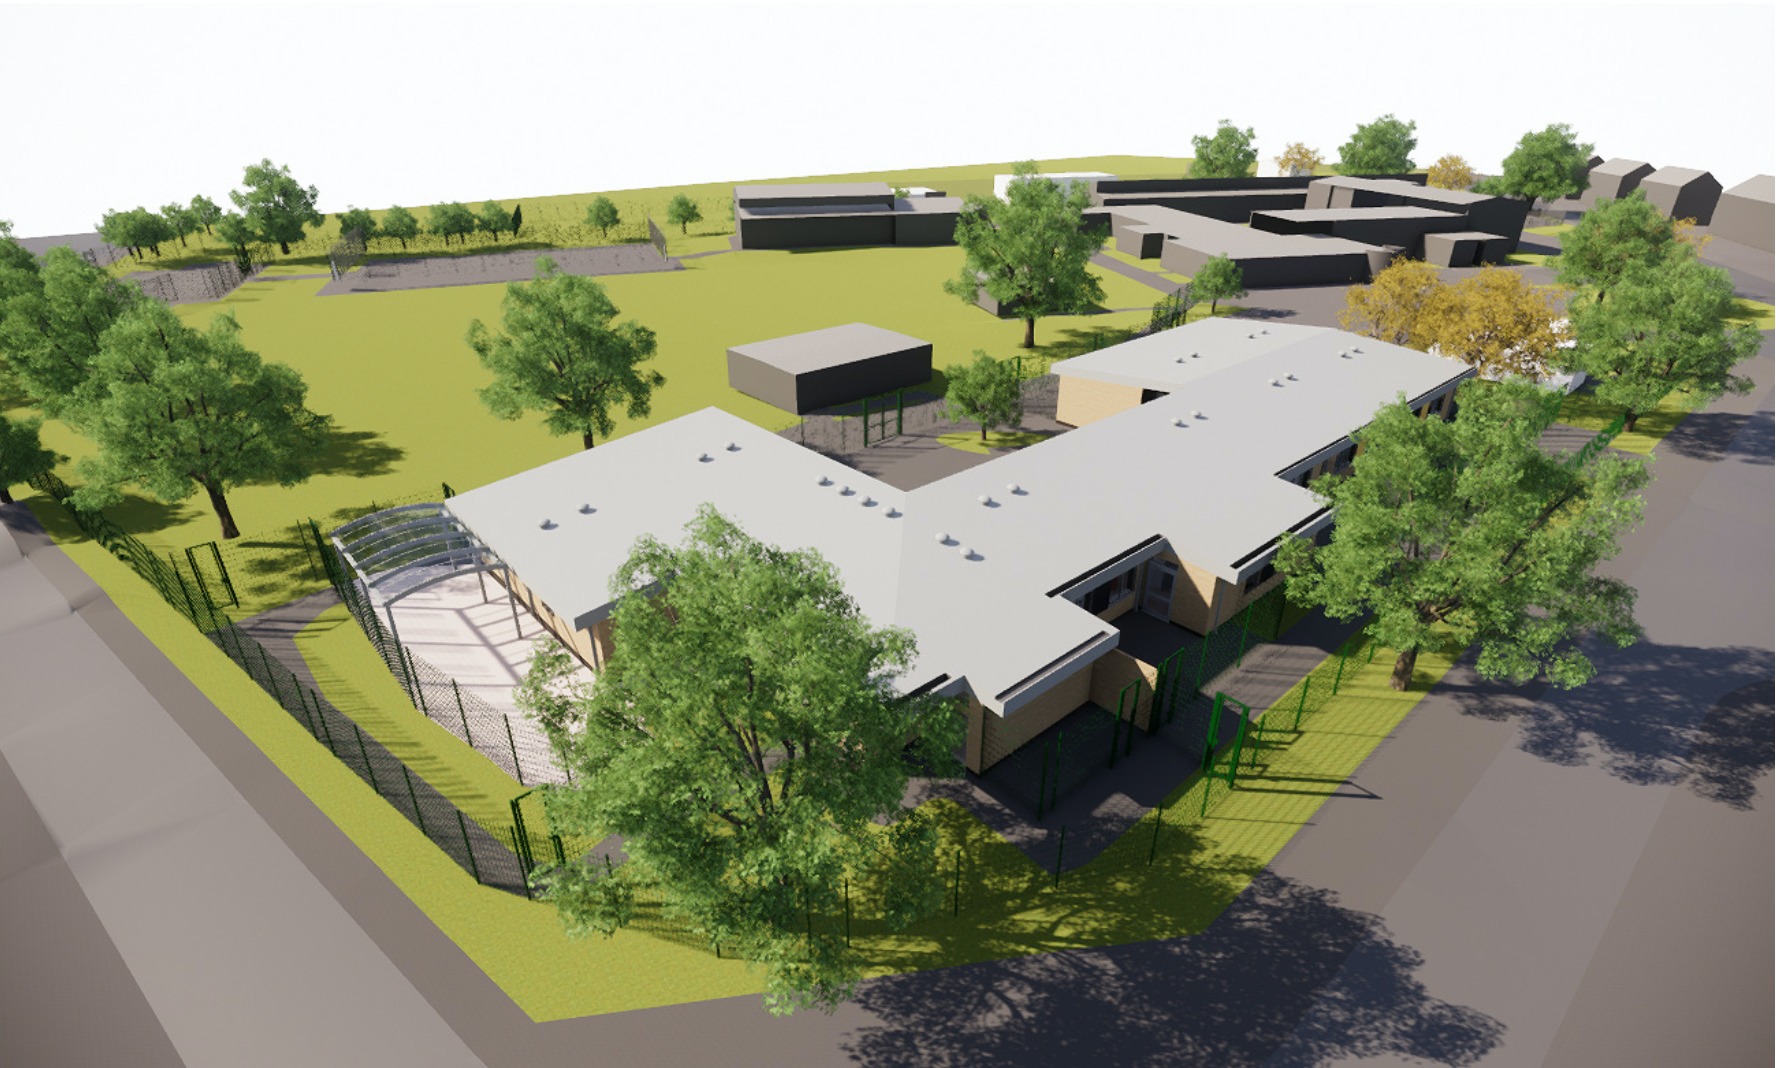 Image of the planned expansion of Sky College